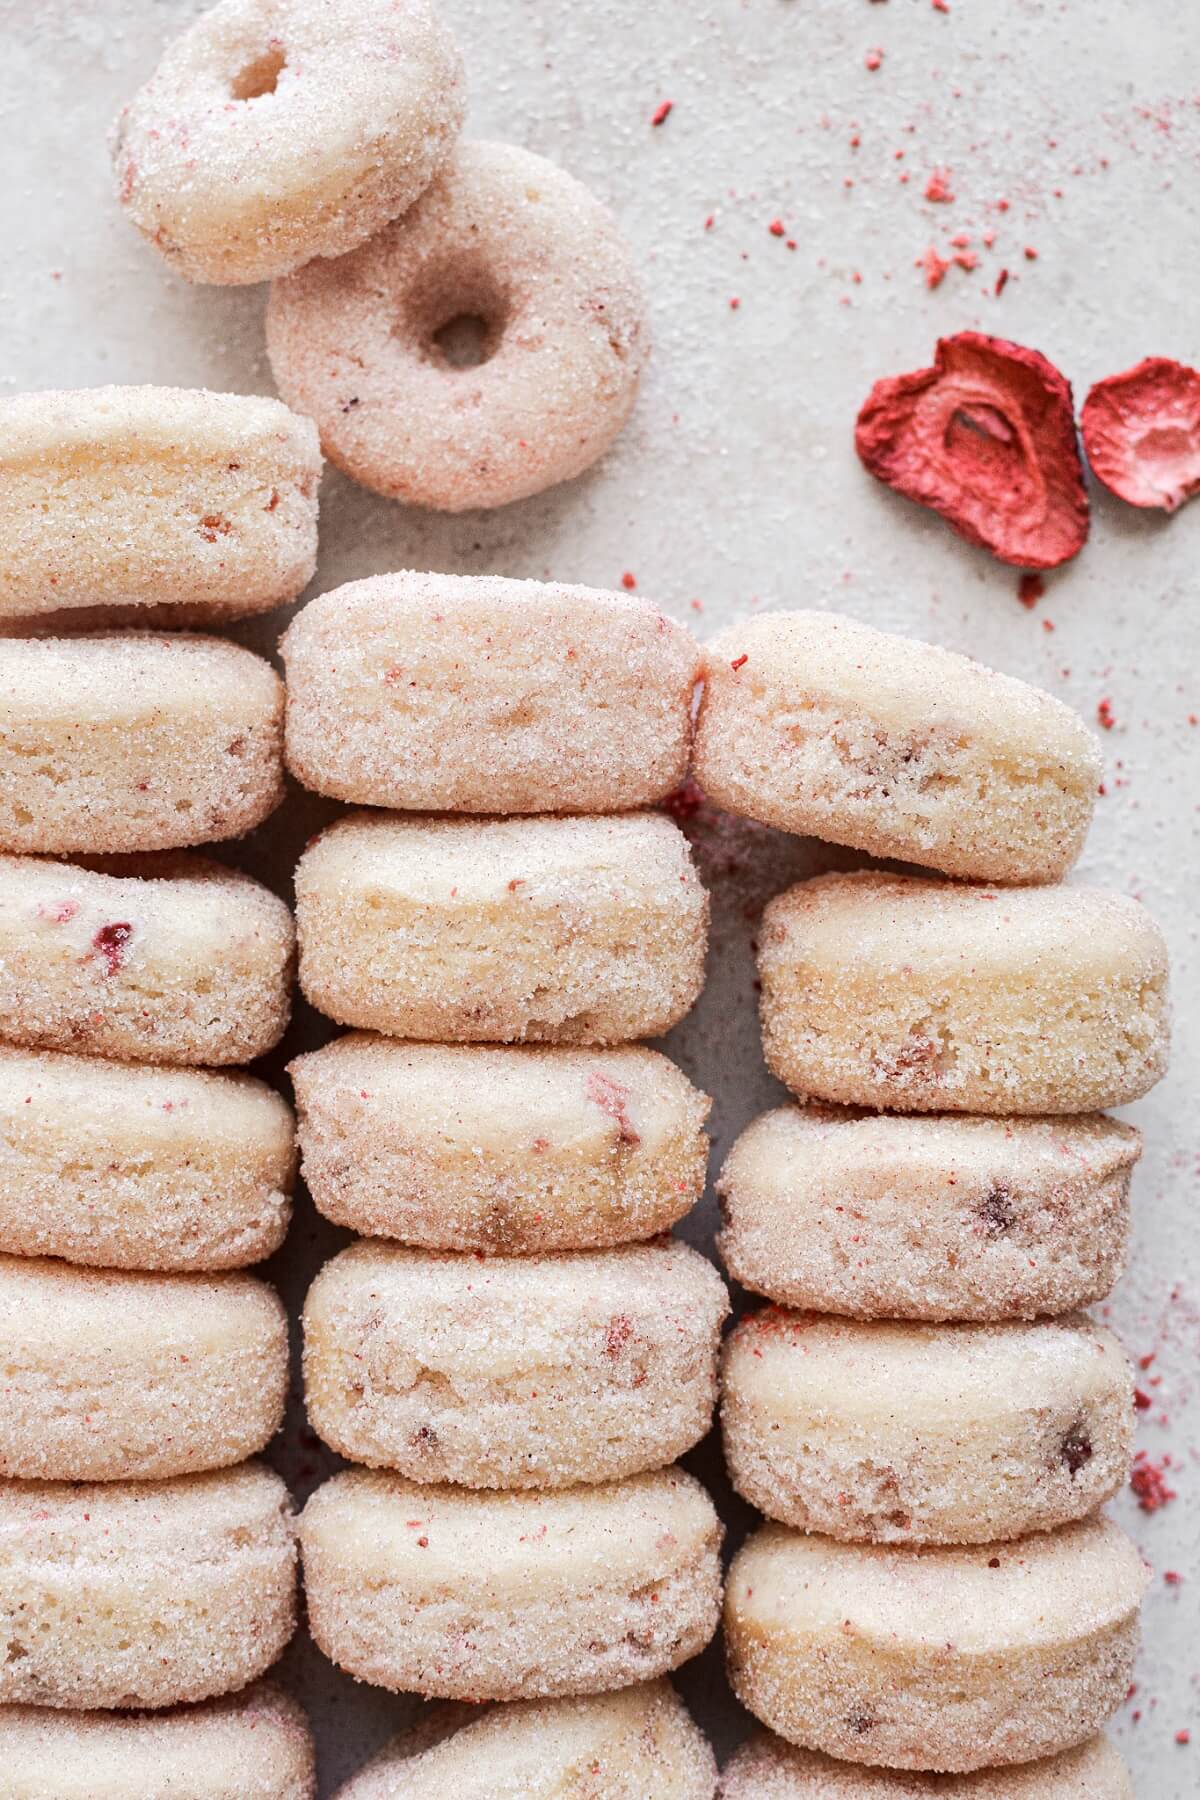 Strawberry sugar coated baked strawberry donuts.